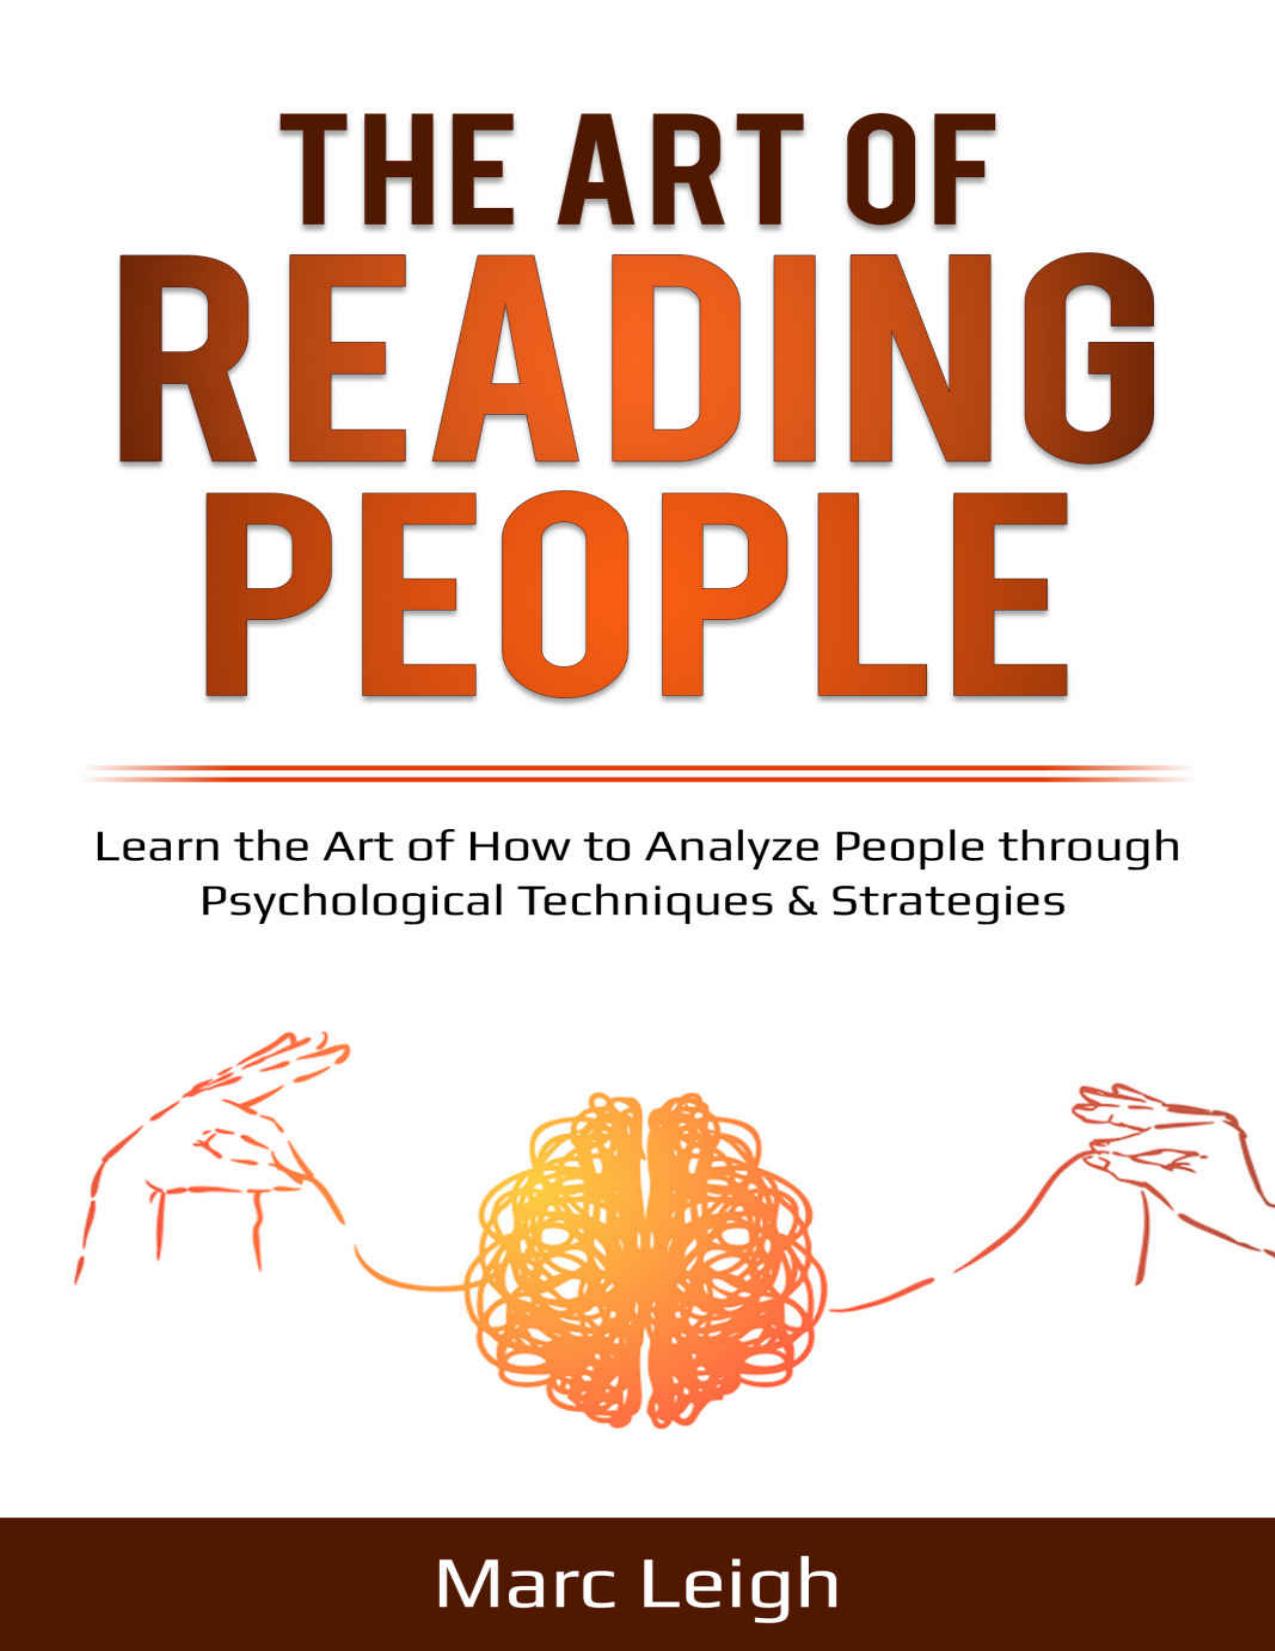 The Art of Reading People: Learn the Art of How to Analyze People through Psychological Techniques & Strategies (EI 2) by Marc Leigh